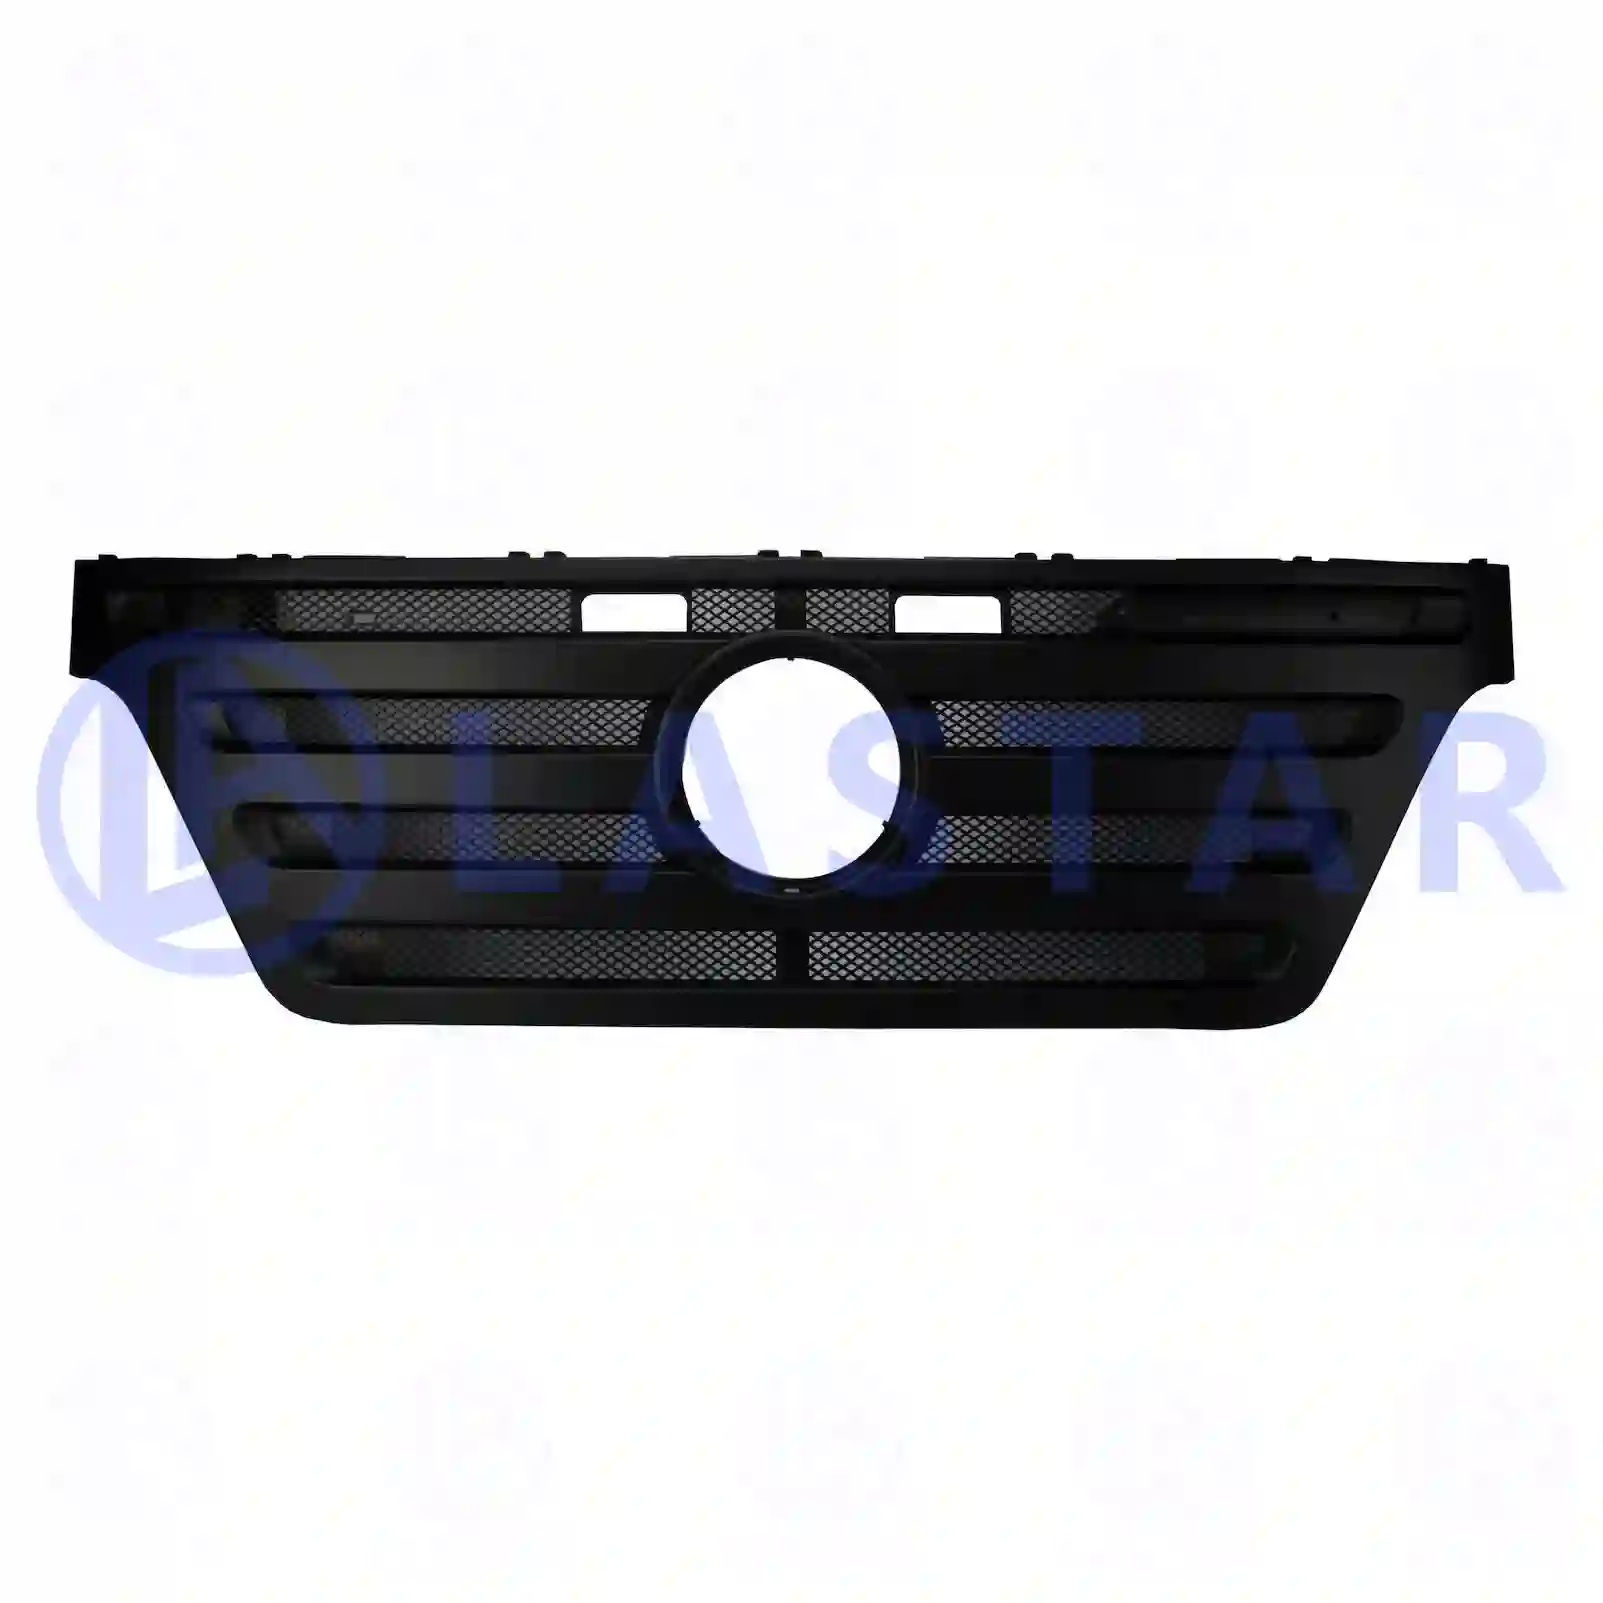 Front grill, 77718800, 9437500518, 94375 ||  77718800 Lastar Spare Part | Truck Spare Parts, Auotomotive Spare Parts Front grill, 77718800, 9437500518, 94375 ||  77718800 Lastar Spare Part | Truck Spare Parts, Auotomotive Spare Parts